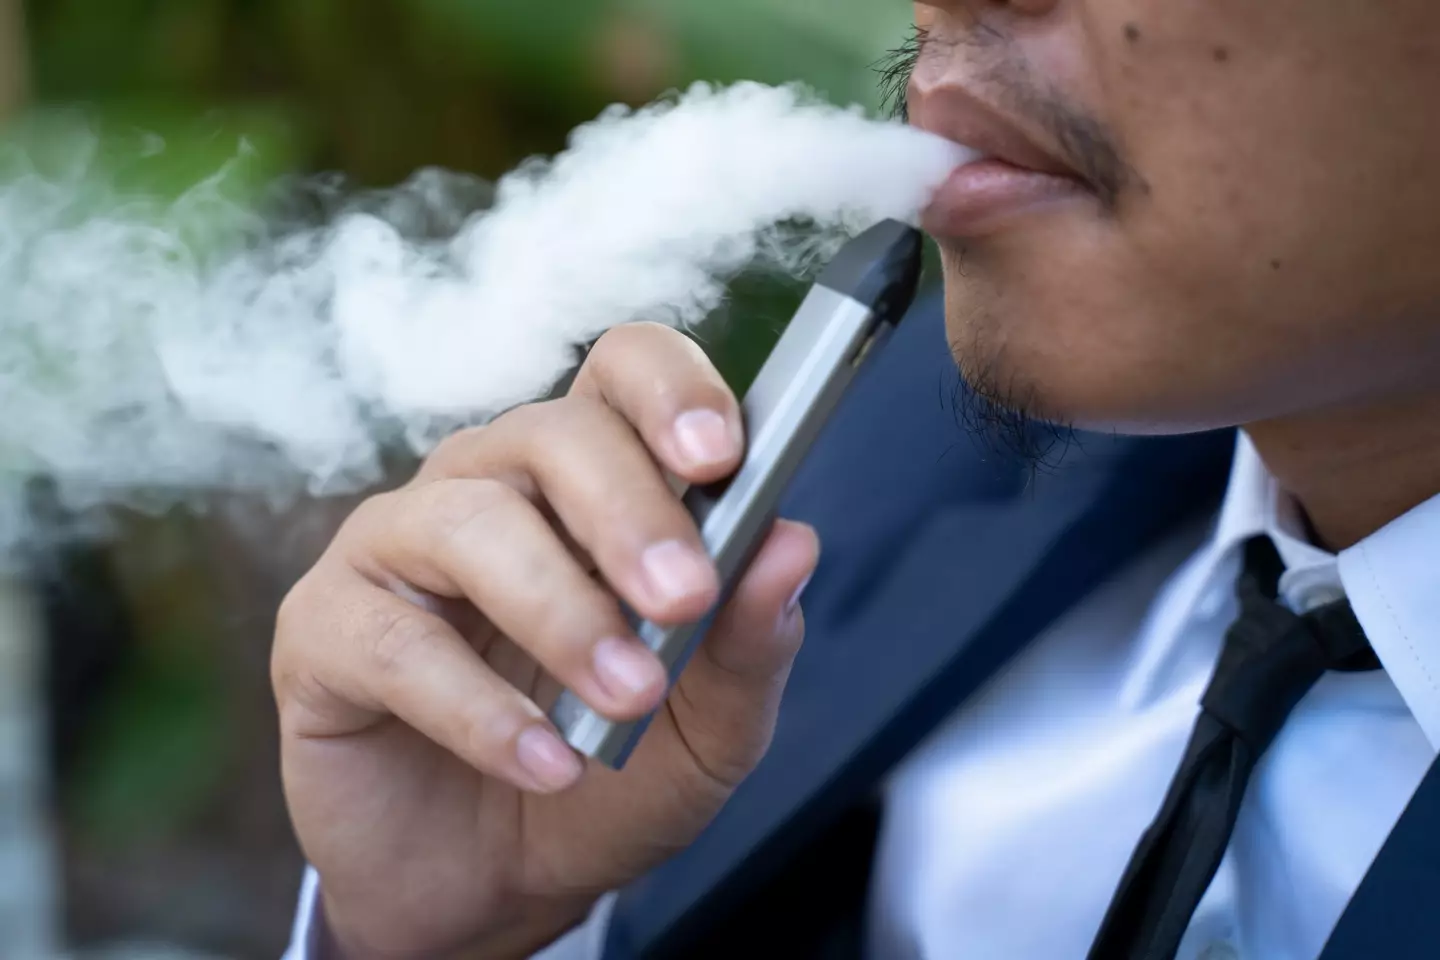 A dentist has warned vapers about the impacts vaping can have on their oral health.